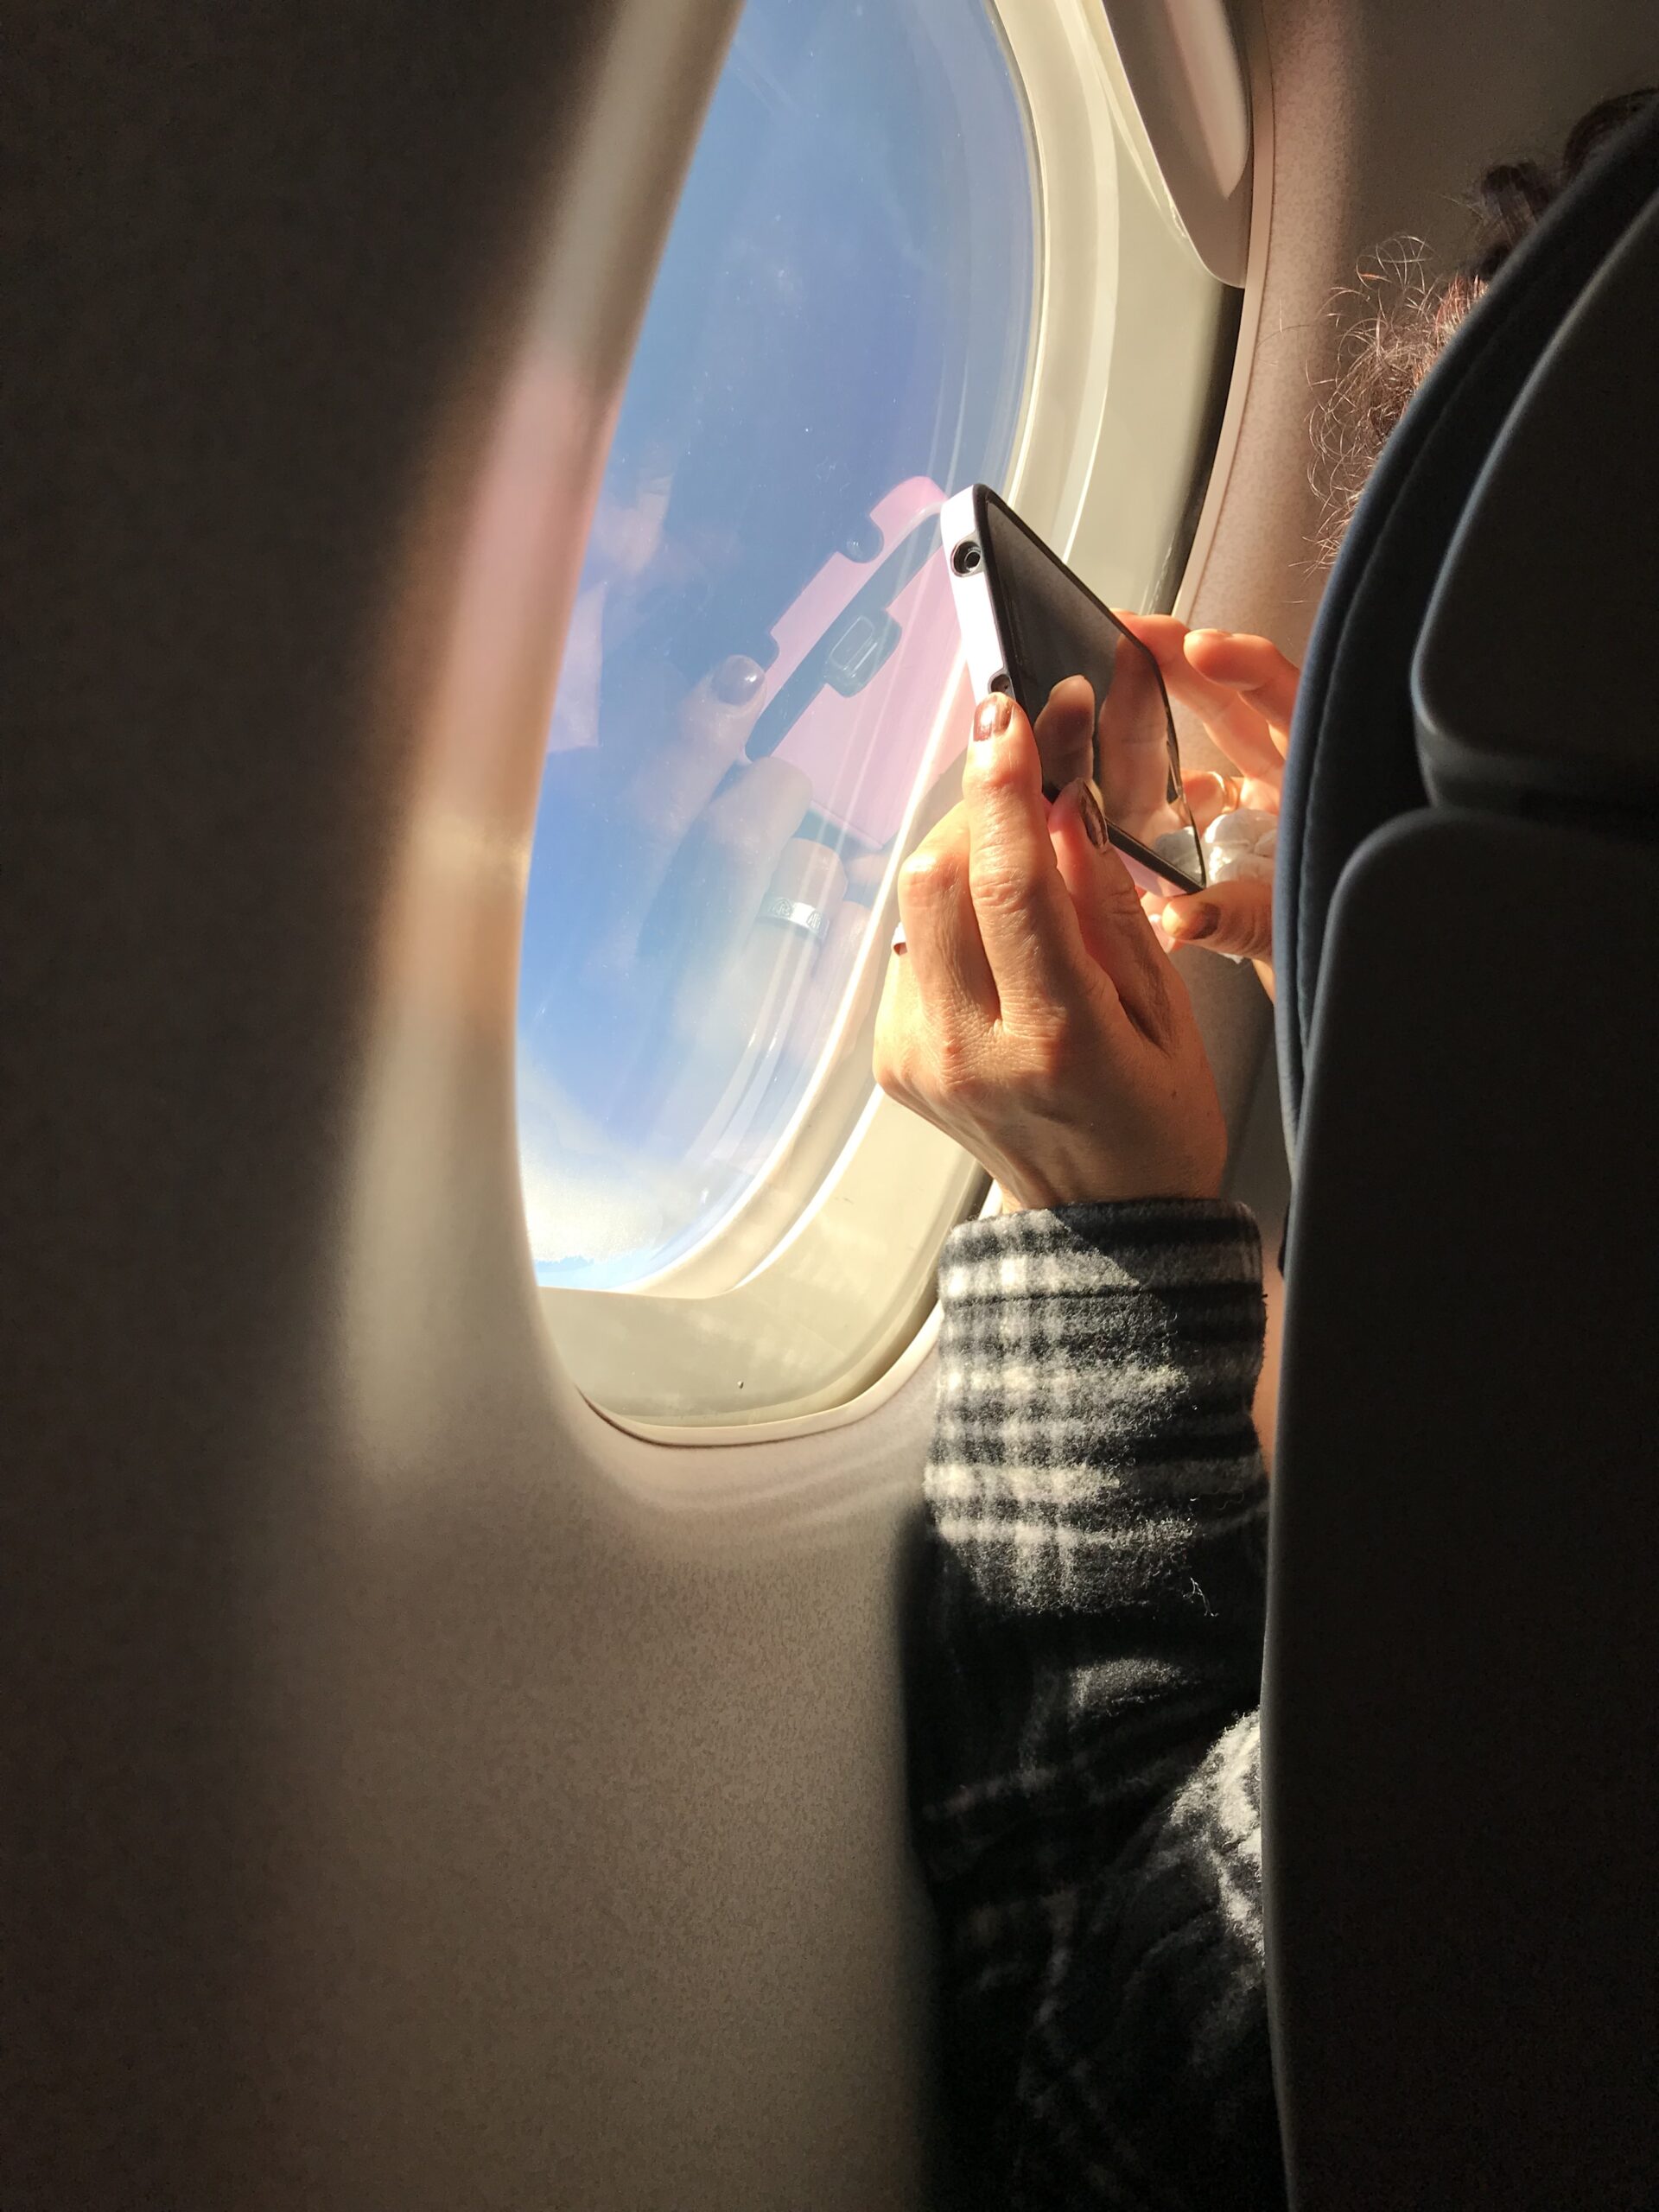 Hands taking photo out an airplane window